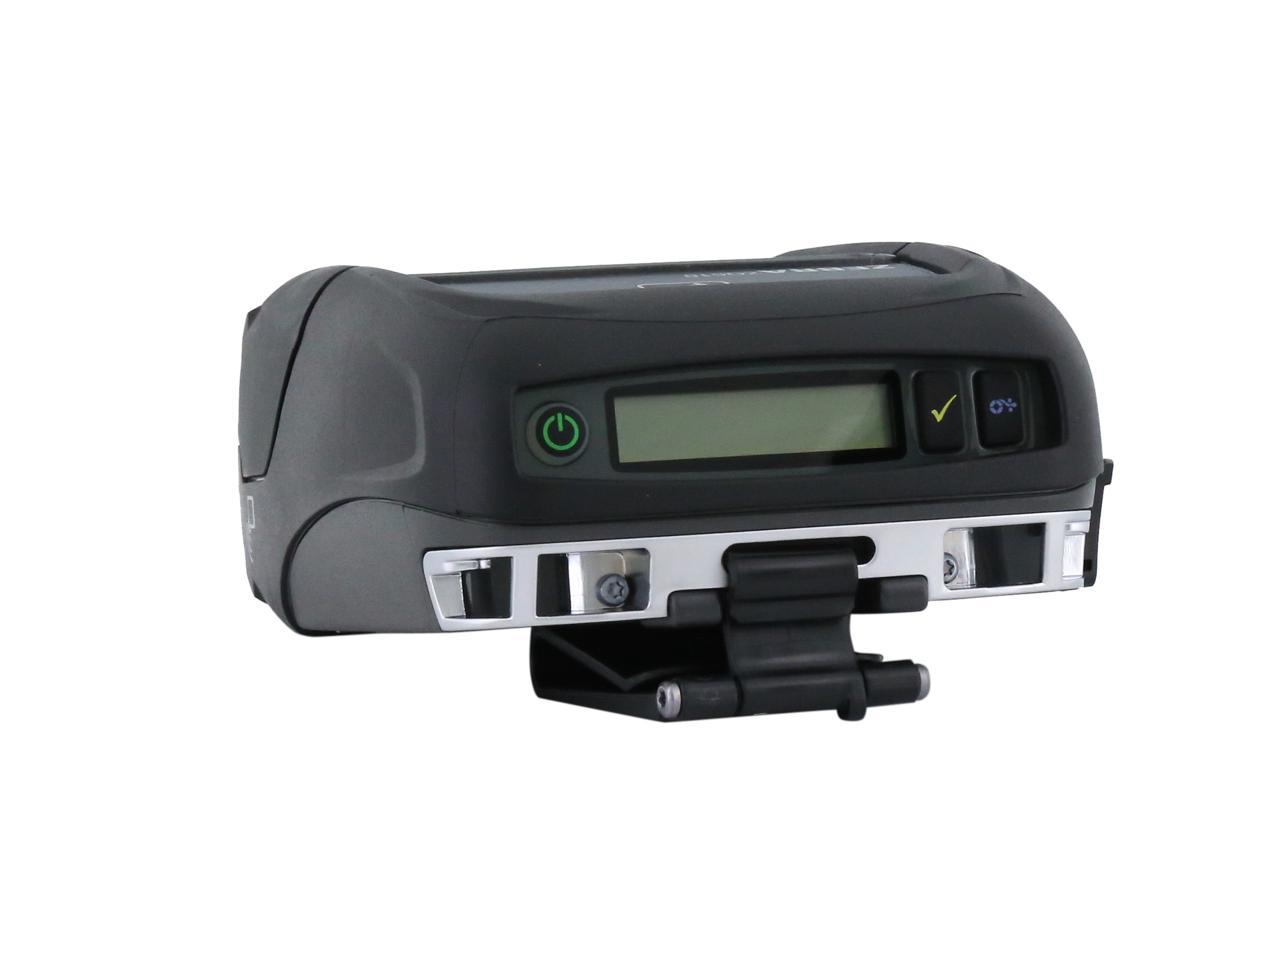 Zebra Zq510 3 Mobile Direct Thermal Receipt And Label Printer 203 Dpi Bluetooth 40 Linered 7647